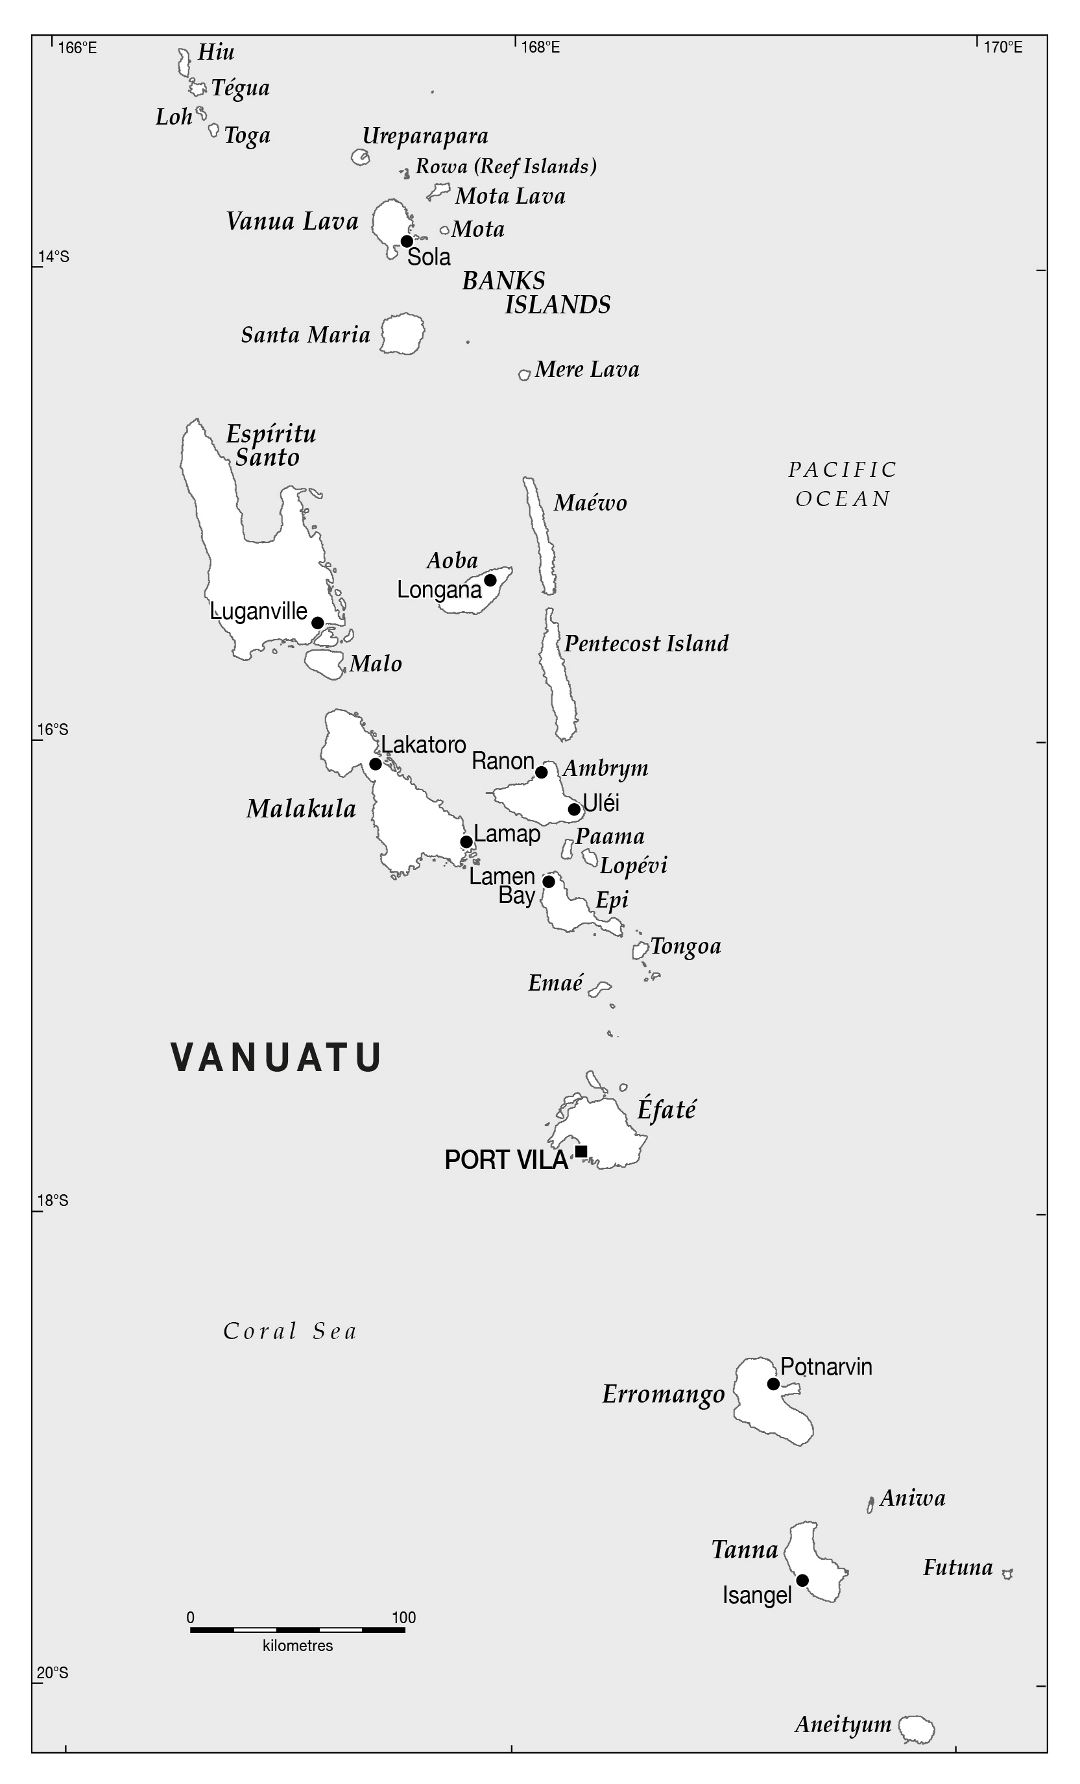 Large political map of Vanuatu with cities and island names